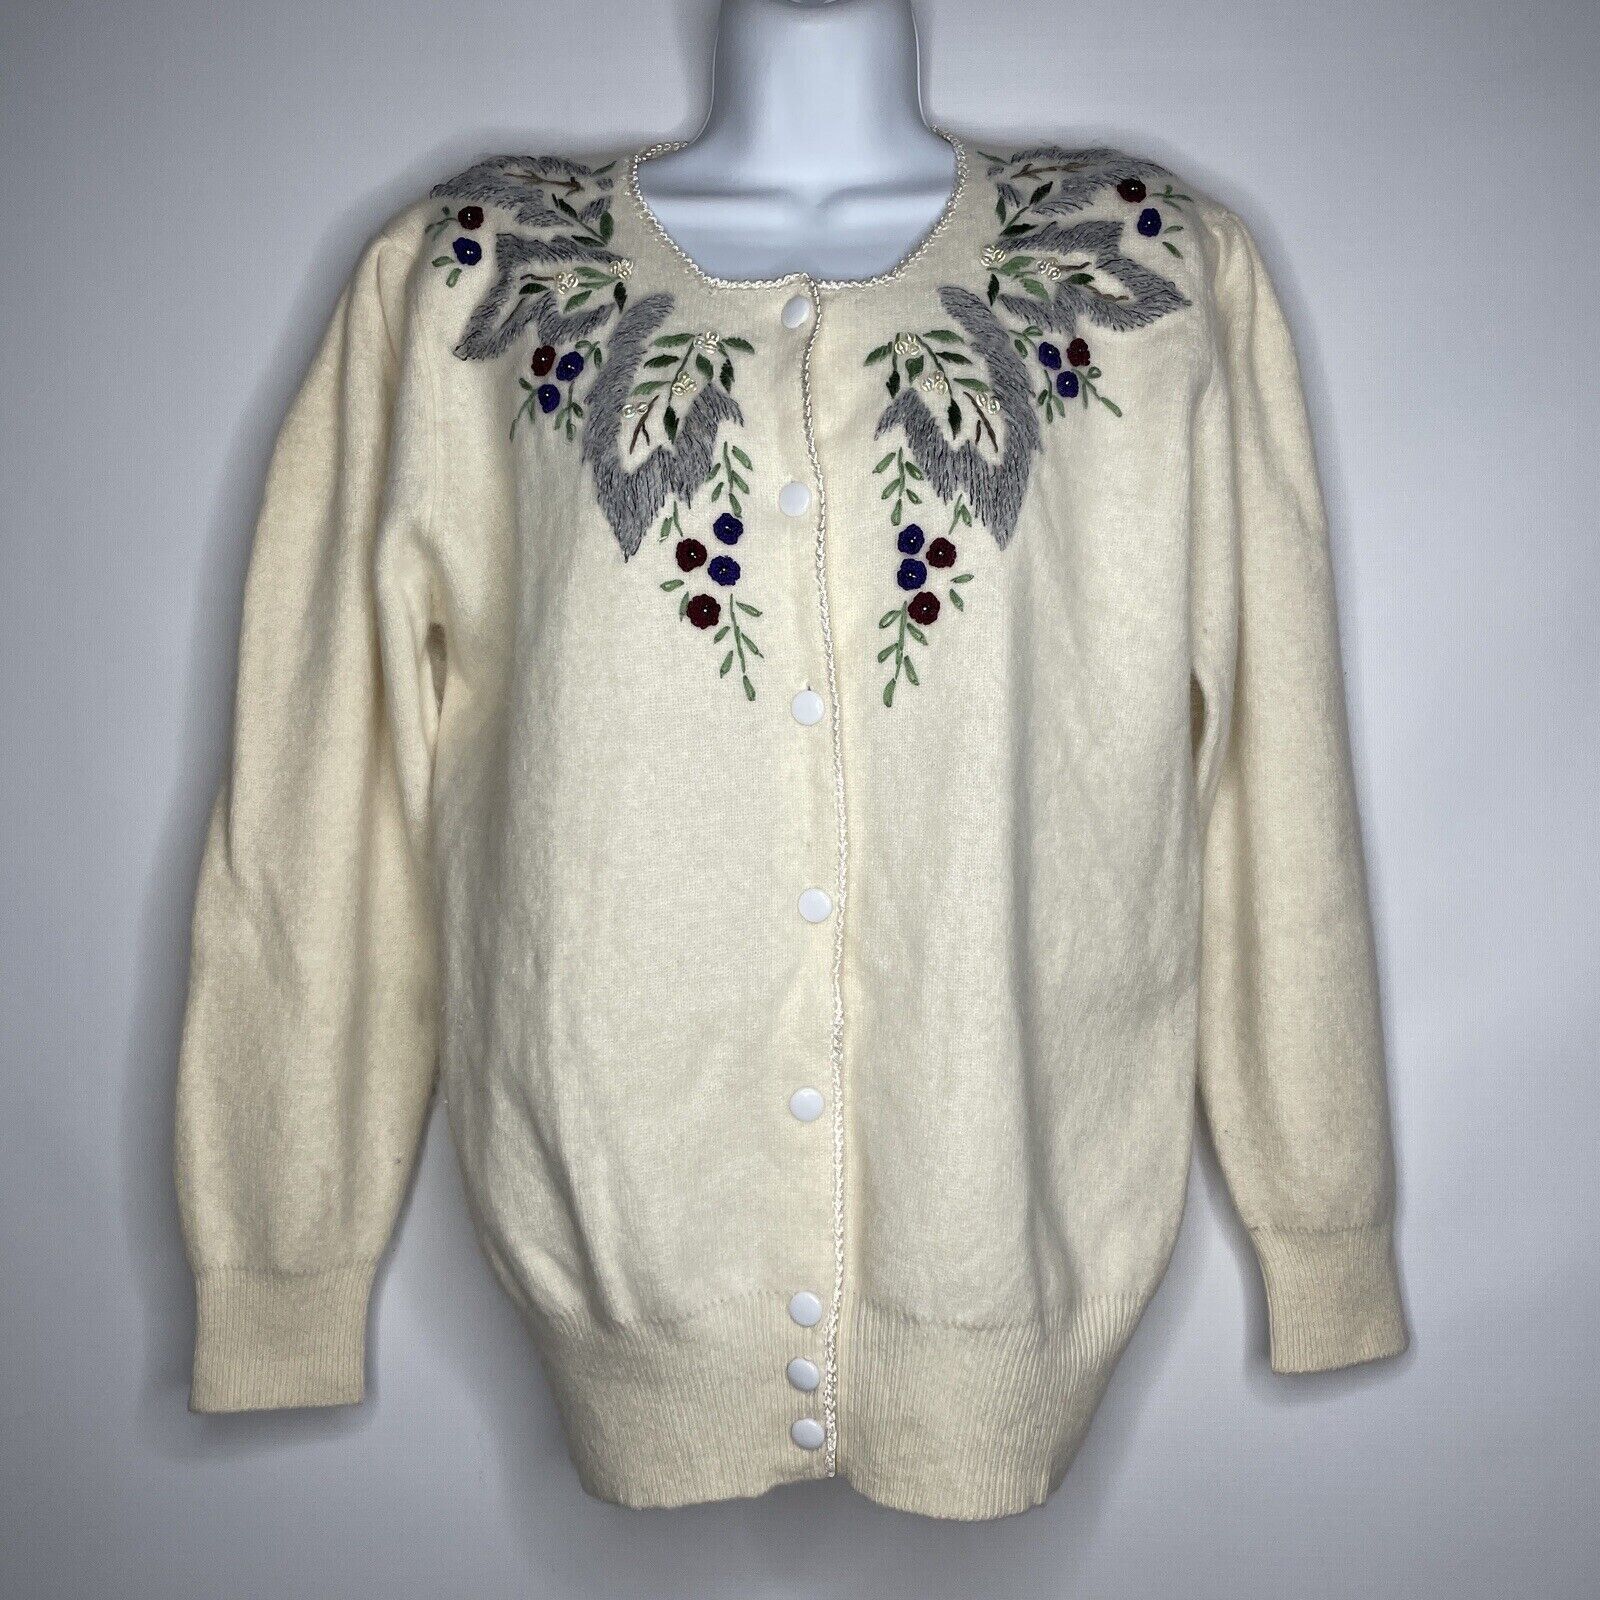 Vintage 80s Ivory Floral Embroidered Beaded Fuzzy Cardigan Sweater Size L / US 10 / IT 46 - 1 Preview